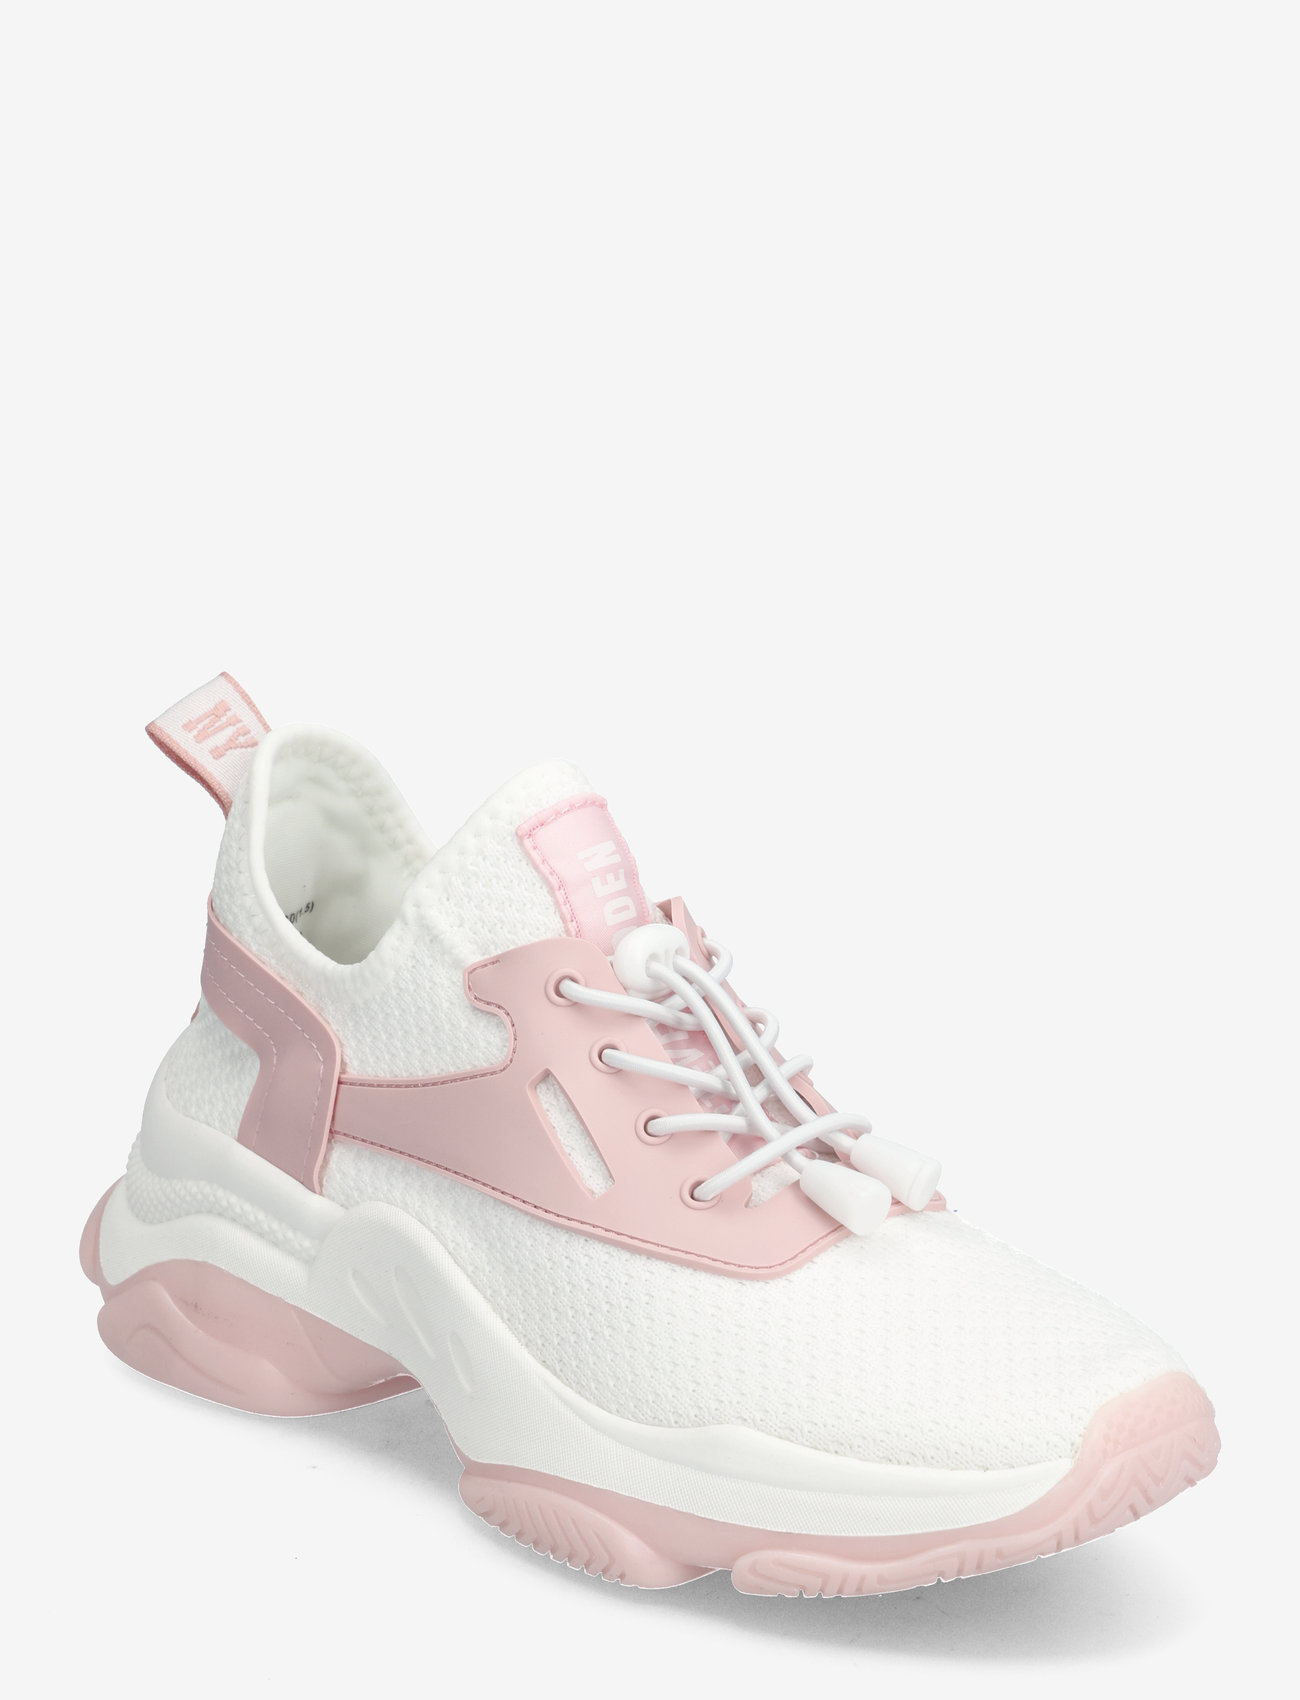 Steve Madden - Match-E Sneaker - low top sneakers - white/pink - 0